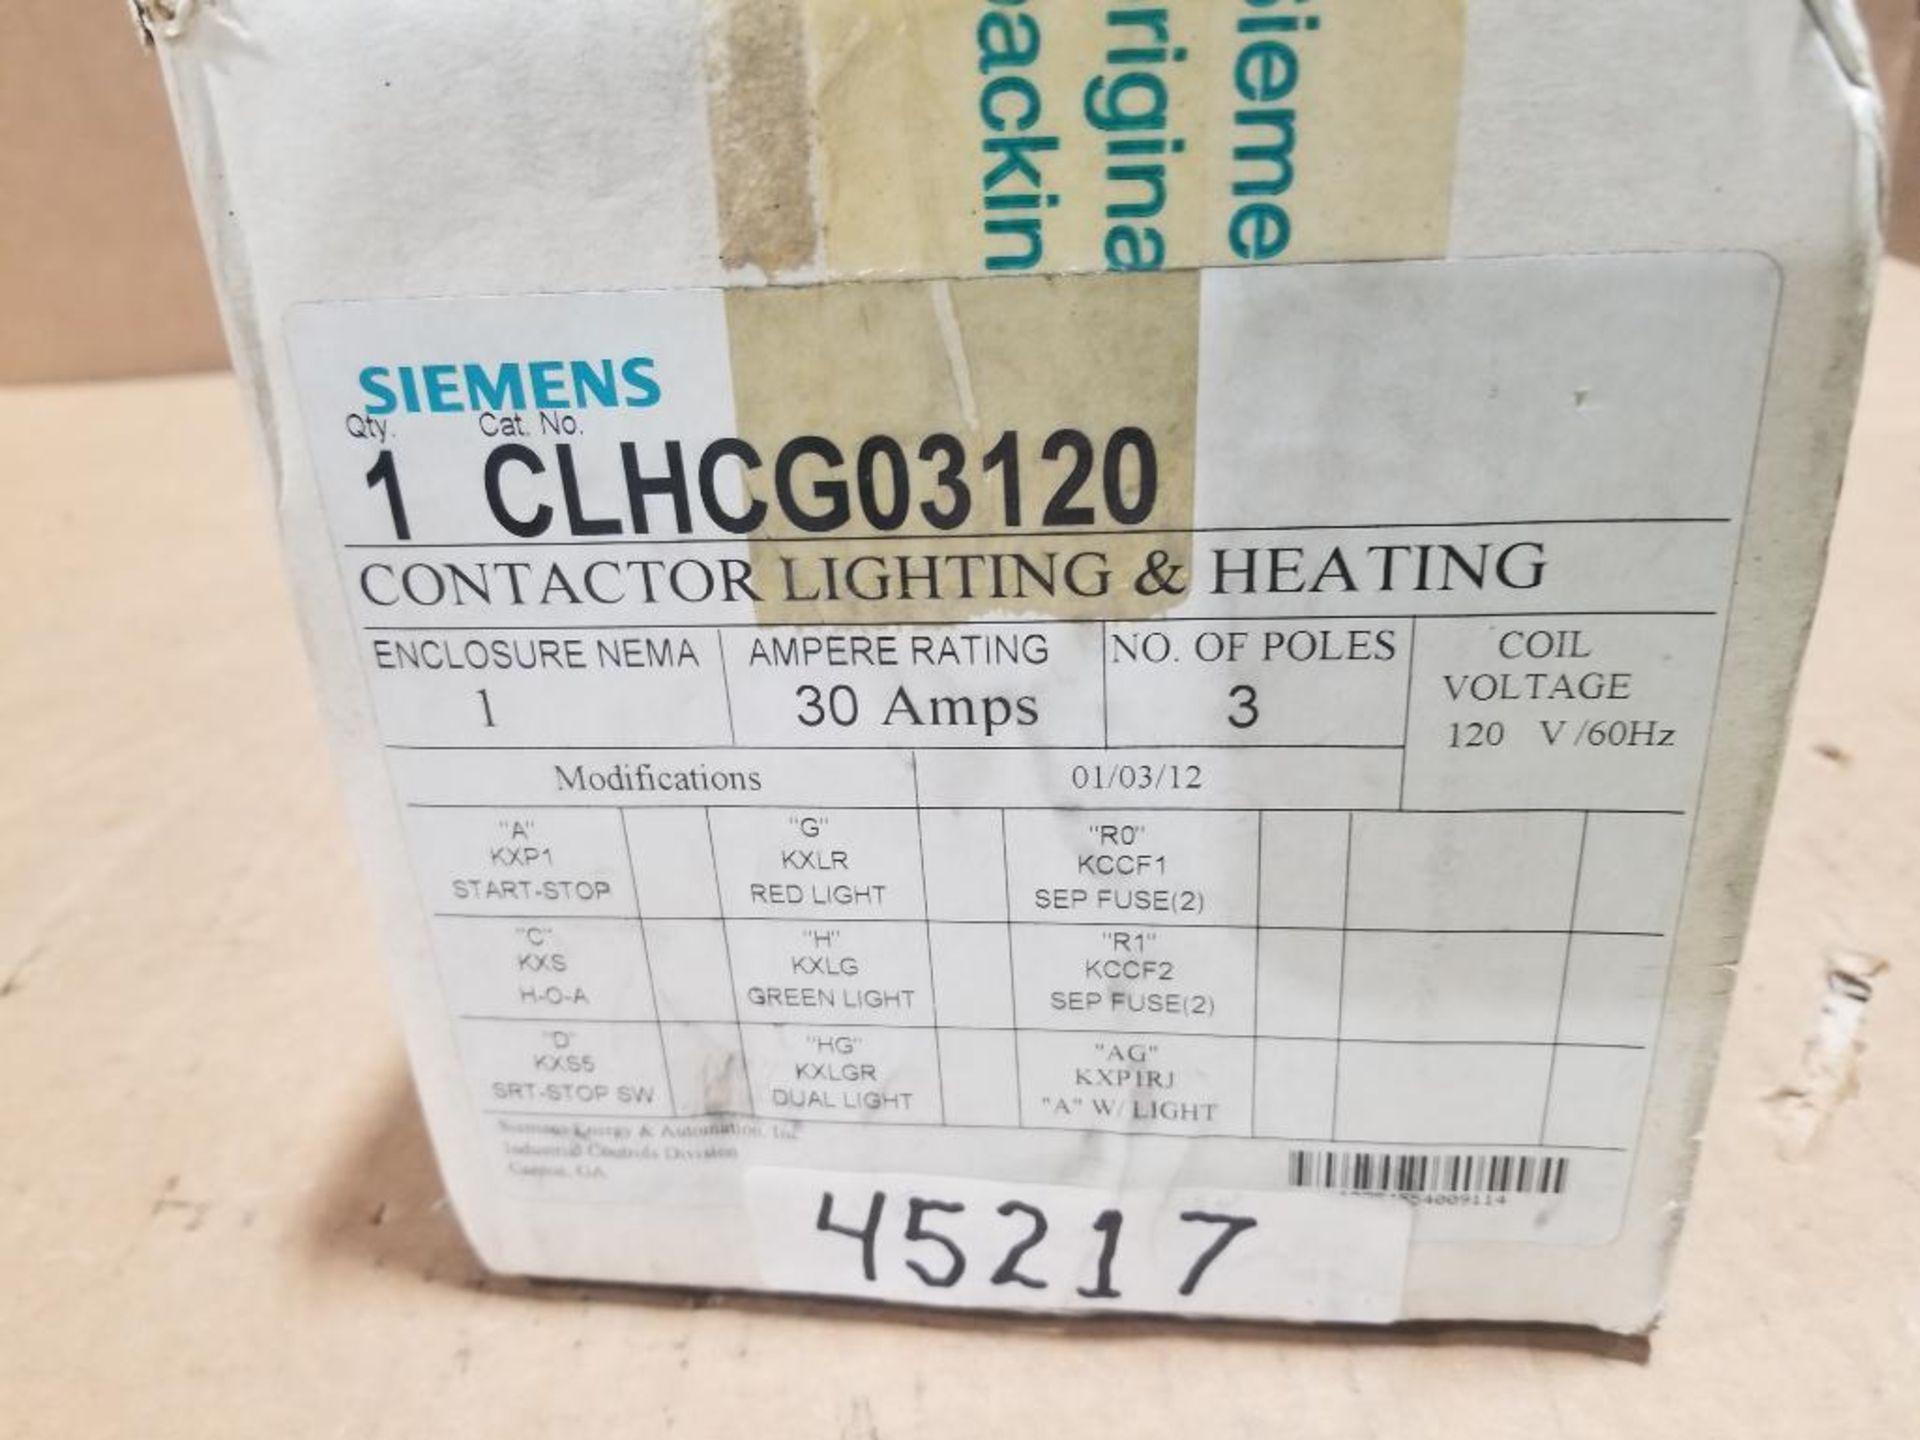 Siemens contactor lighting and heating. Part number CLHCG03120. - Image 4 of 4